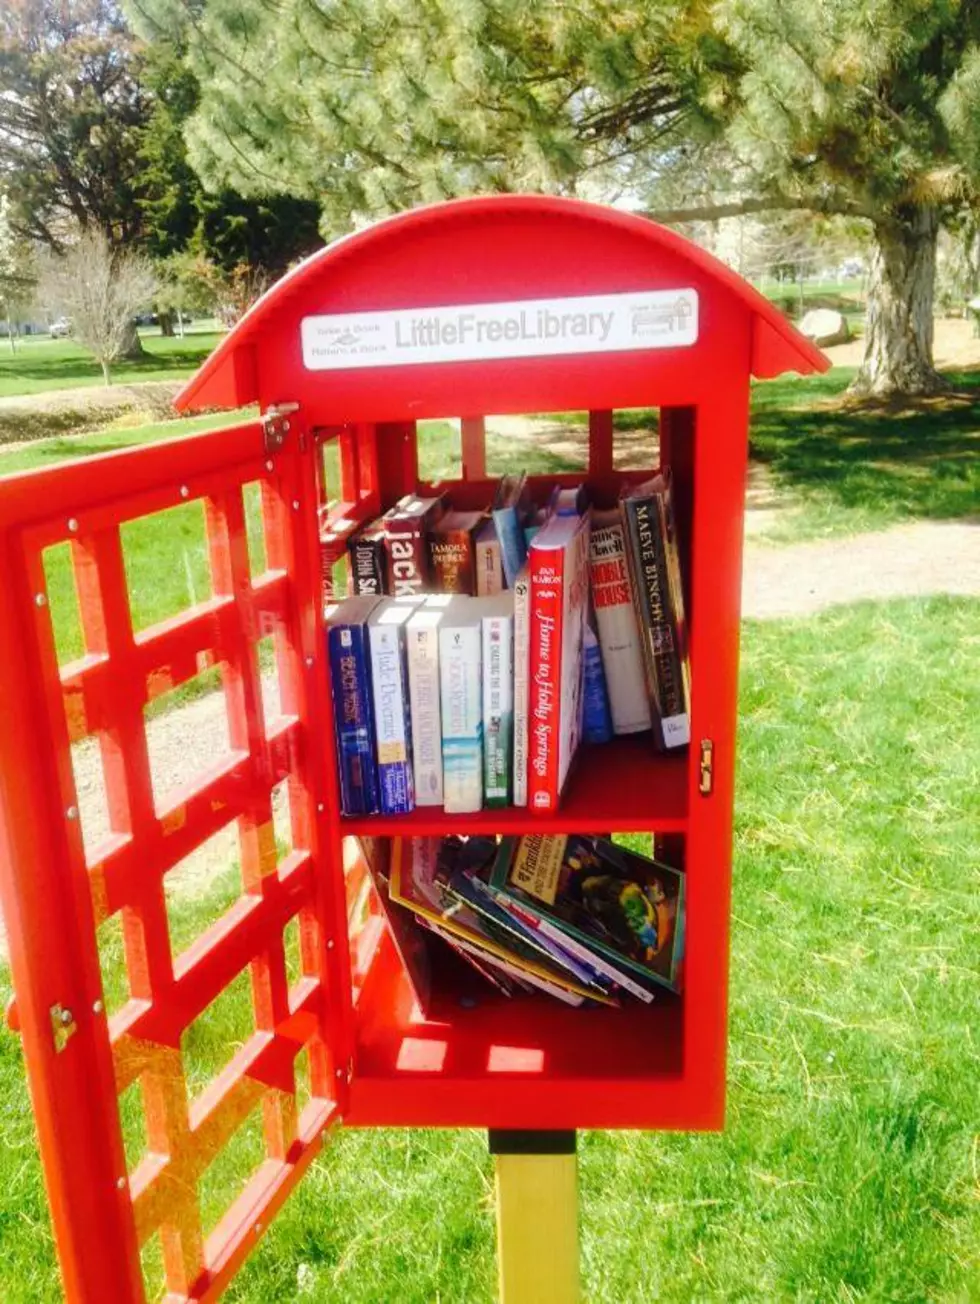 Hermiston Has Cool Lil Libraries Everywhere!